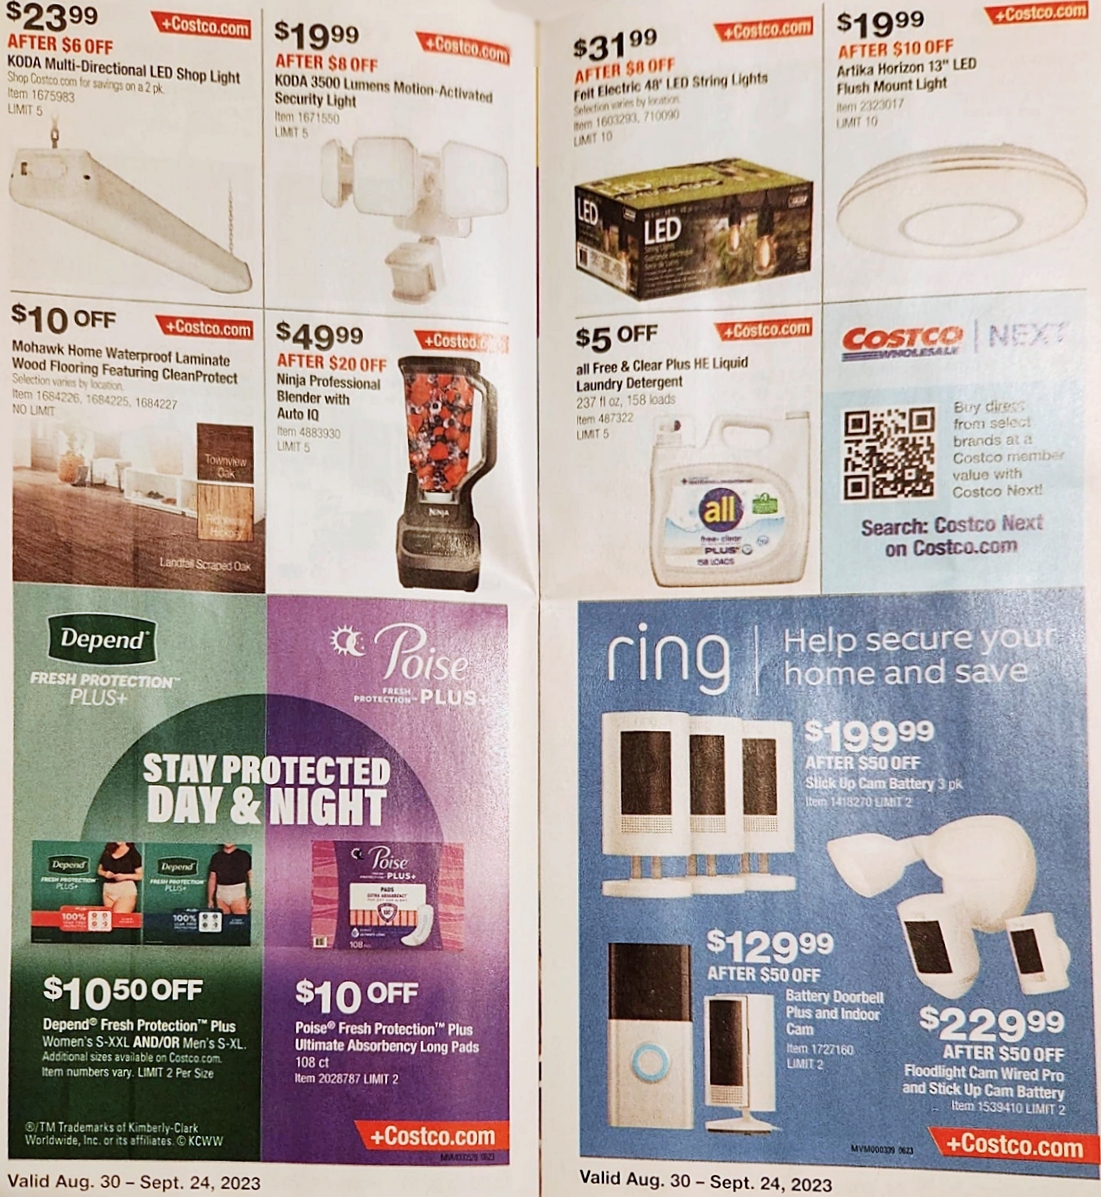 Costco Coupon Book SEPTEMBER 2023 | P 10 and 11